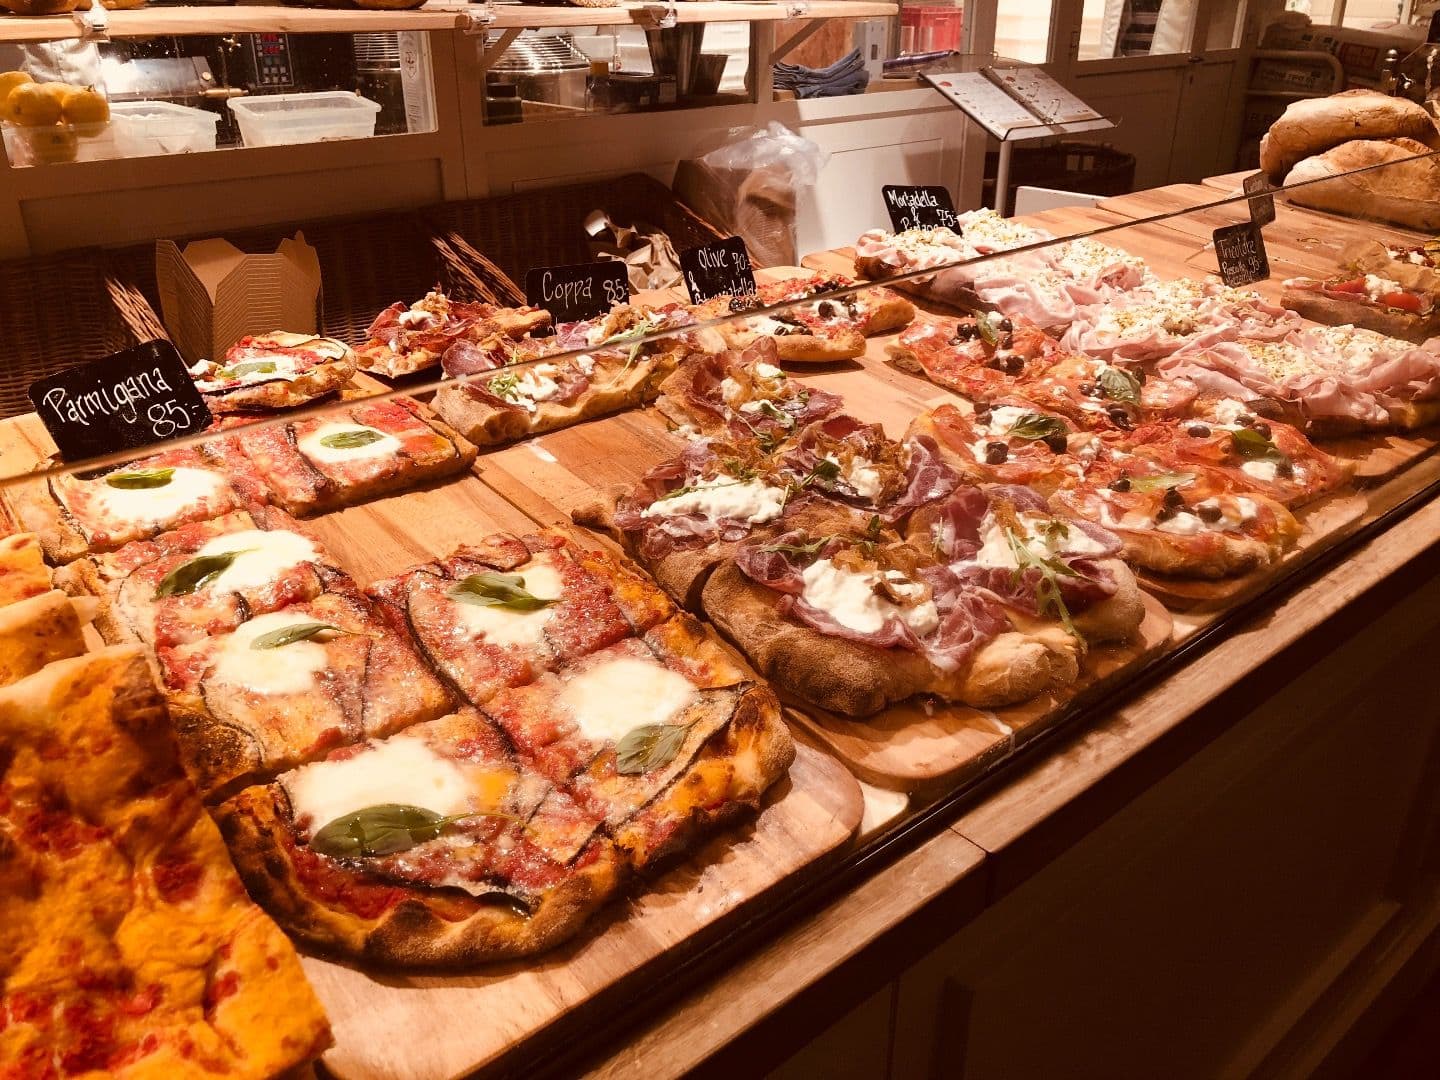 Photo from Eataly by Linn W. (11/04/2018)